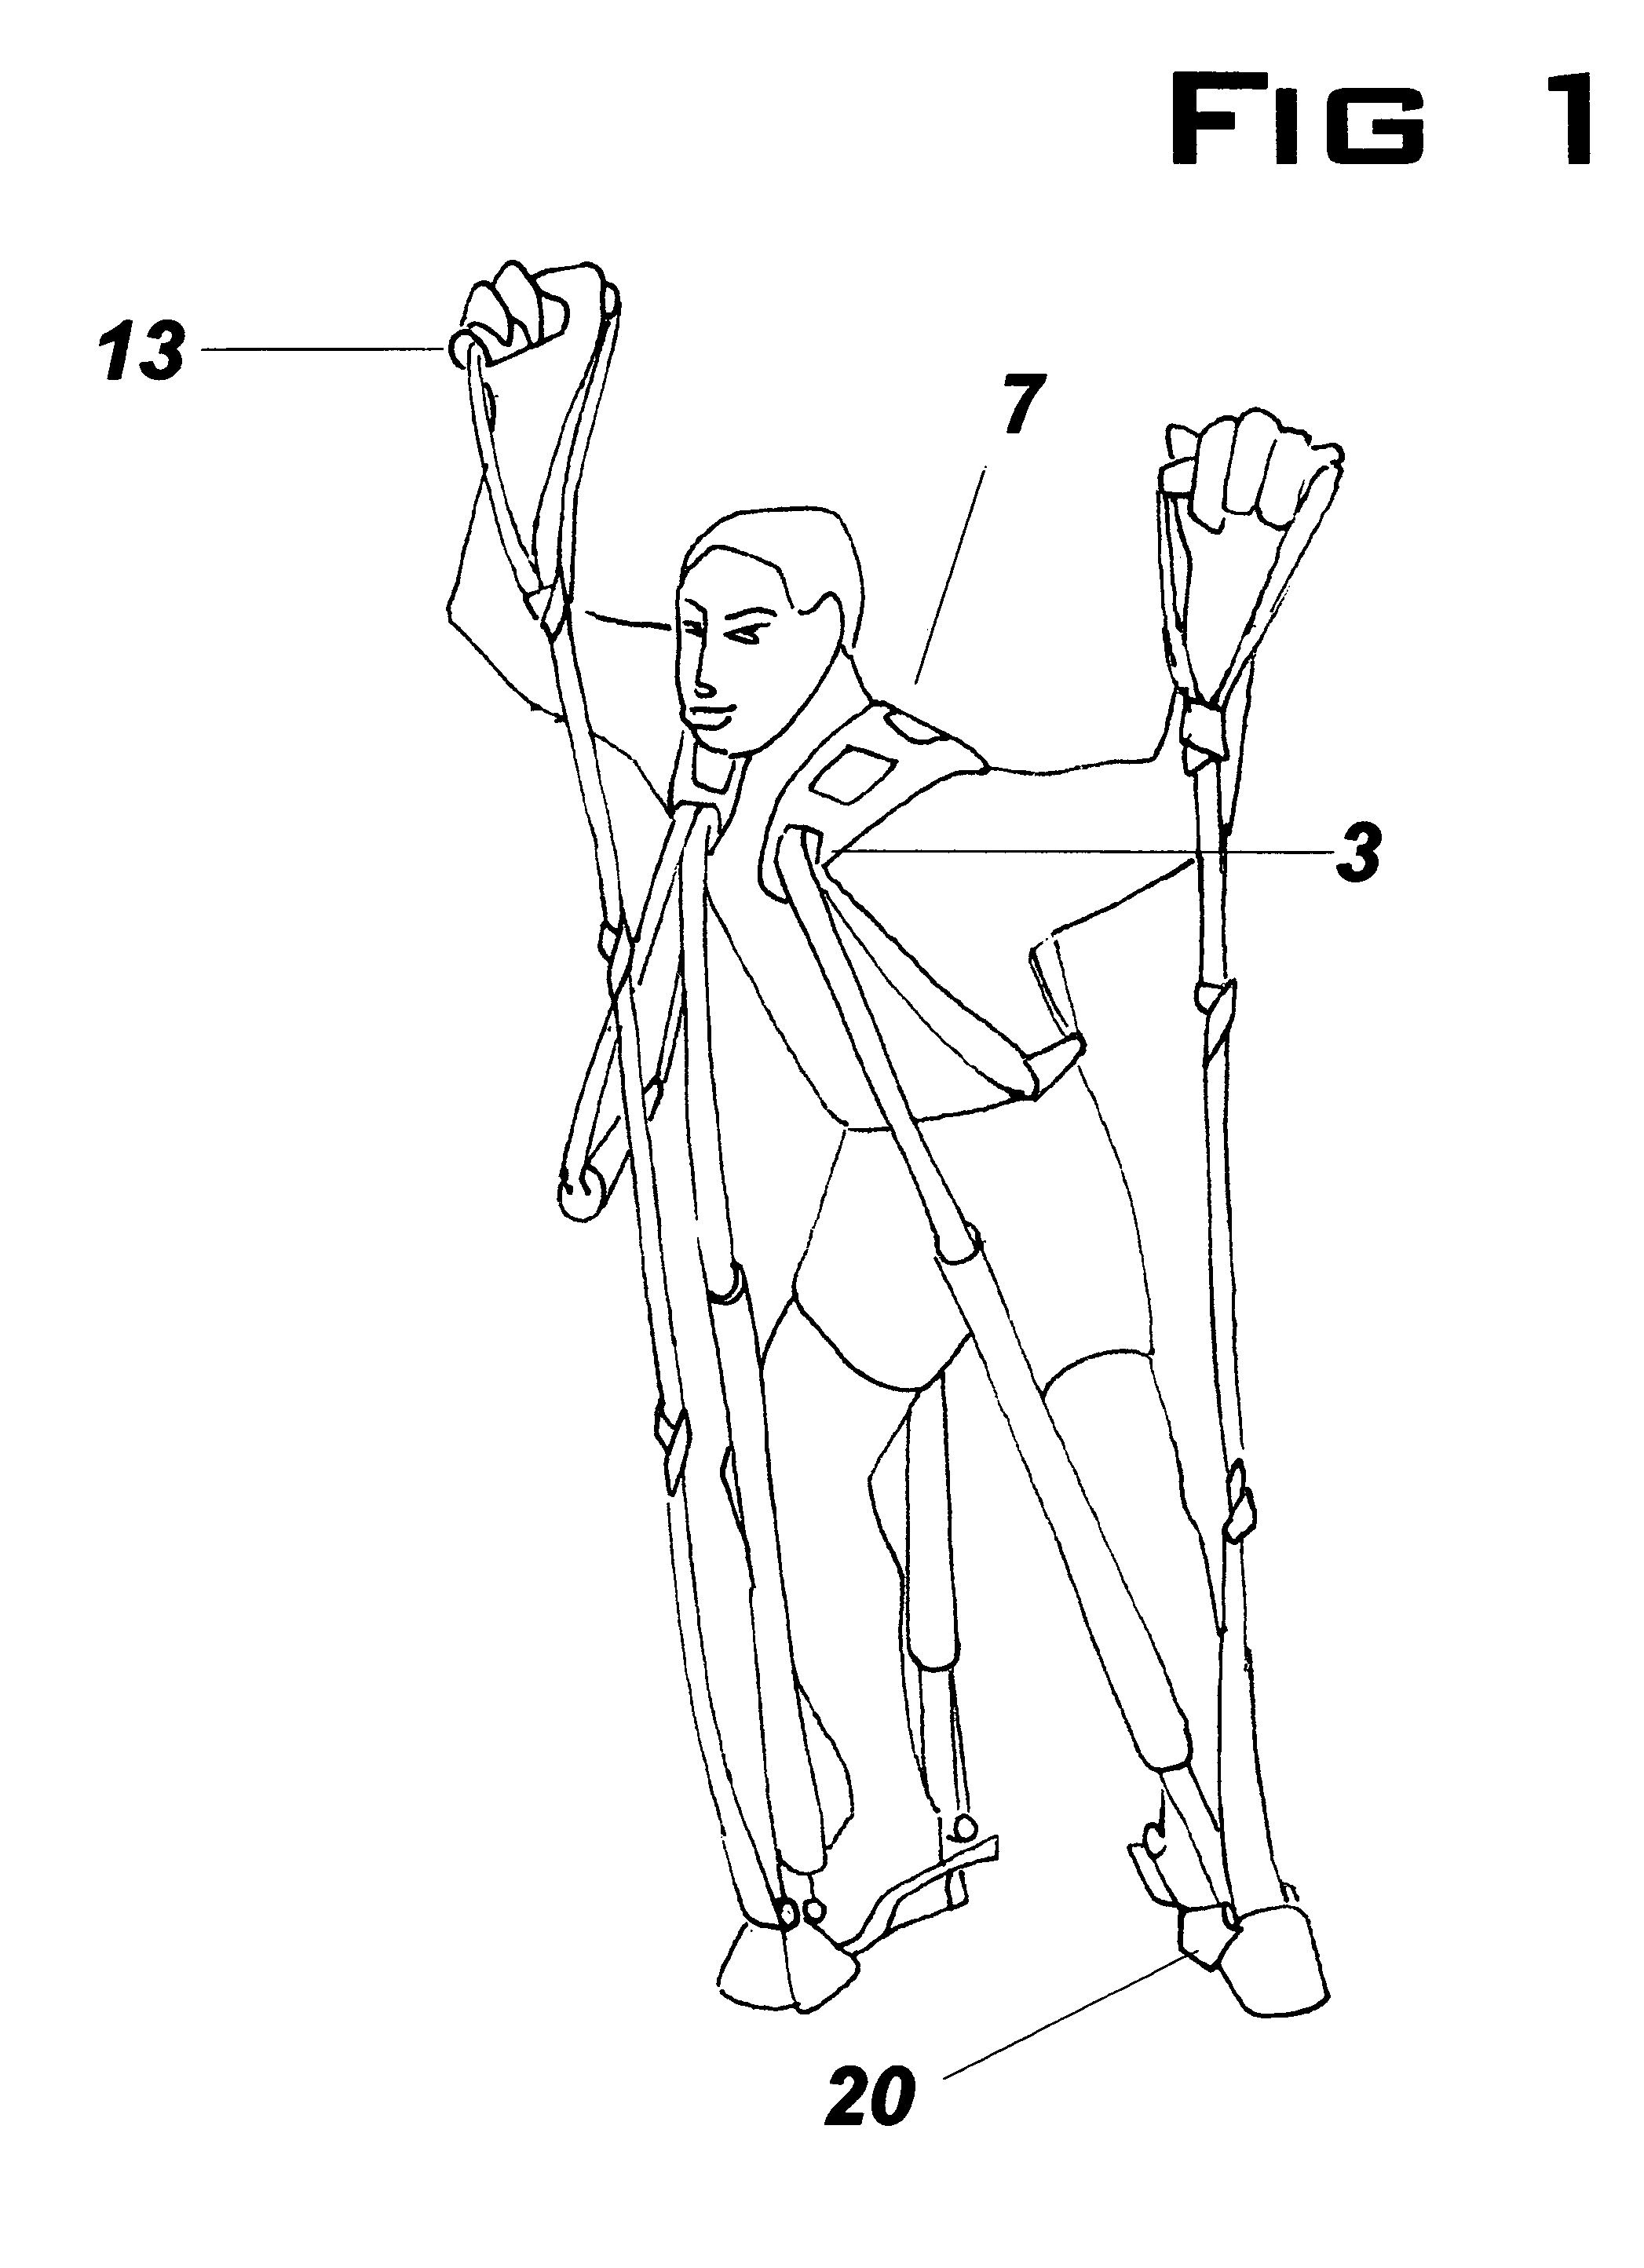 Rubber band musculoskeletal exercise device